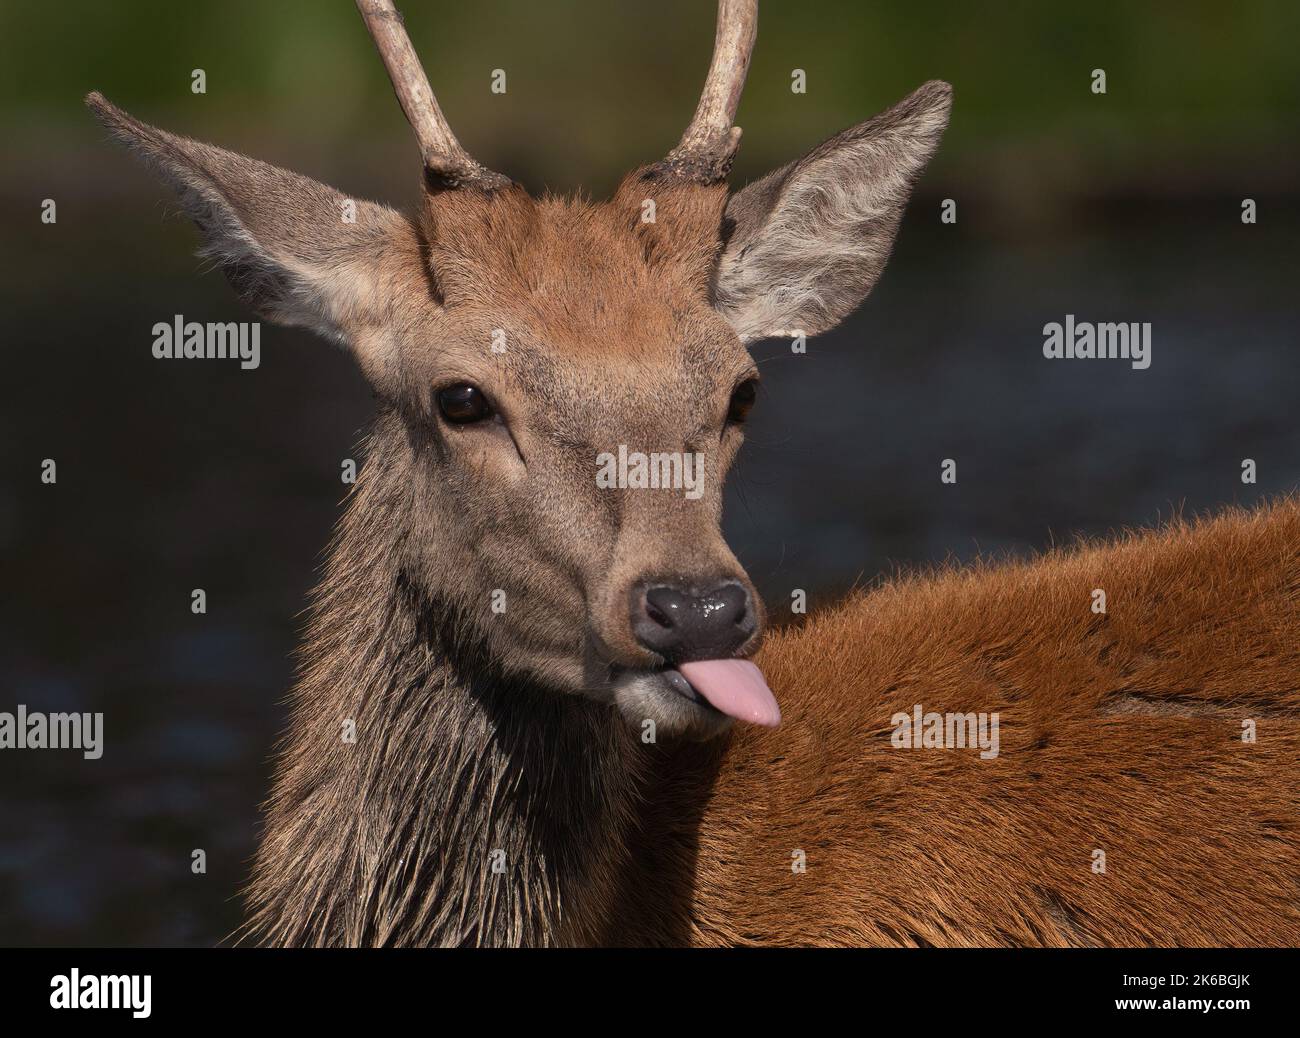 A raspberry stag. London, UK: THIS RED Stag was bellowing as it entered the rut letting out a territorial call while a young rival appears to respond Stock Photo